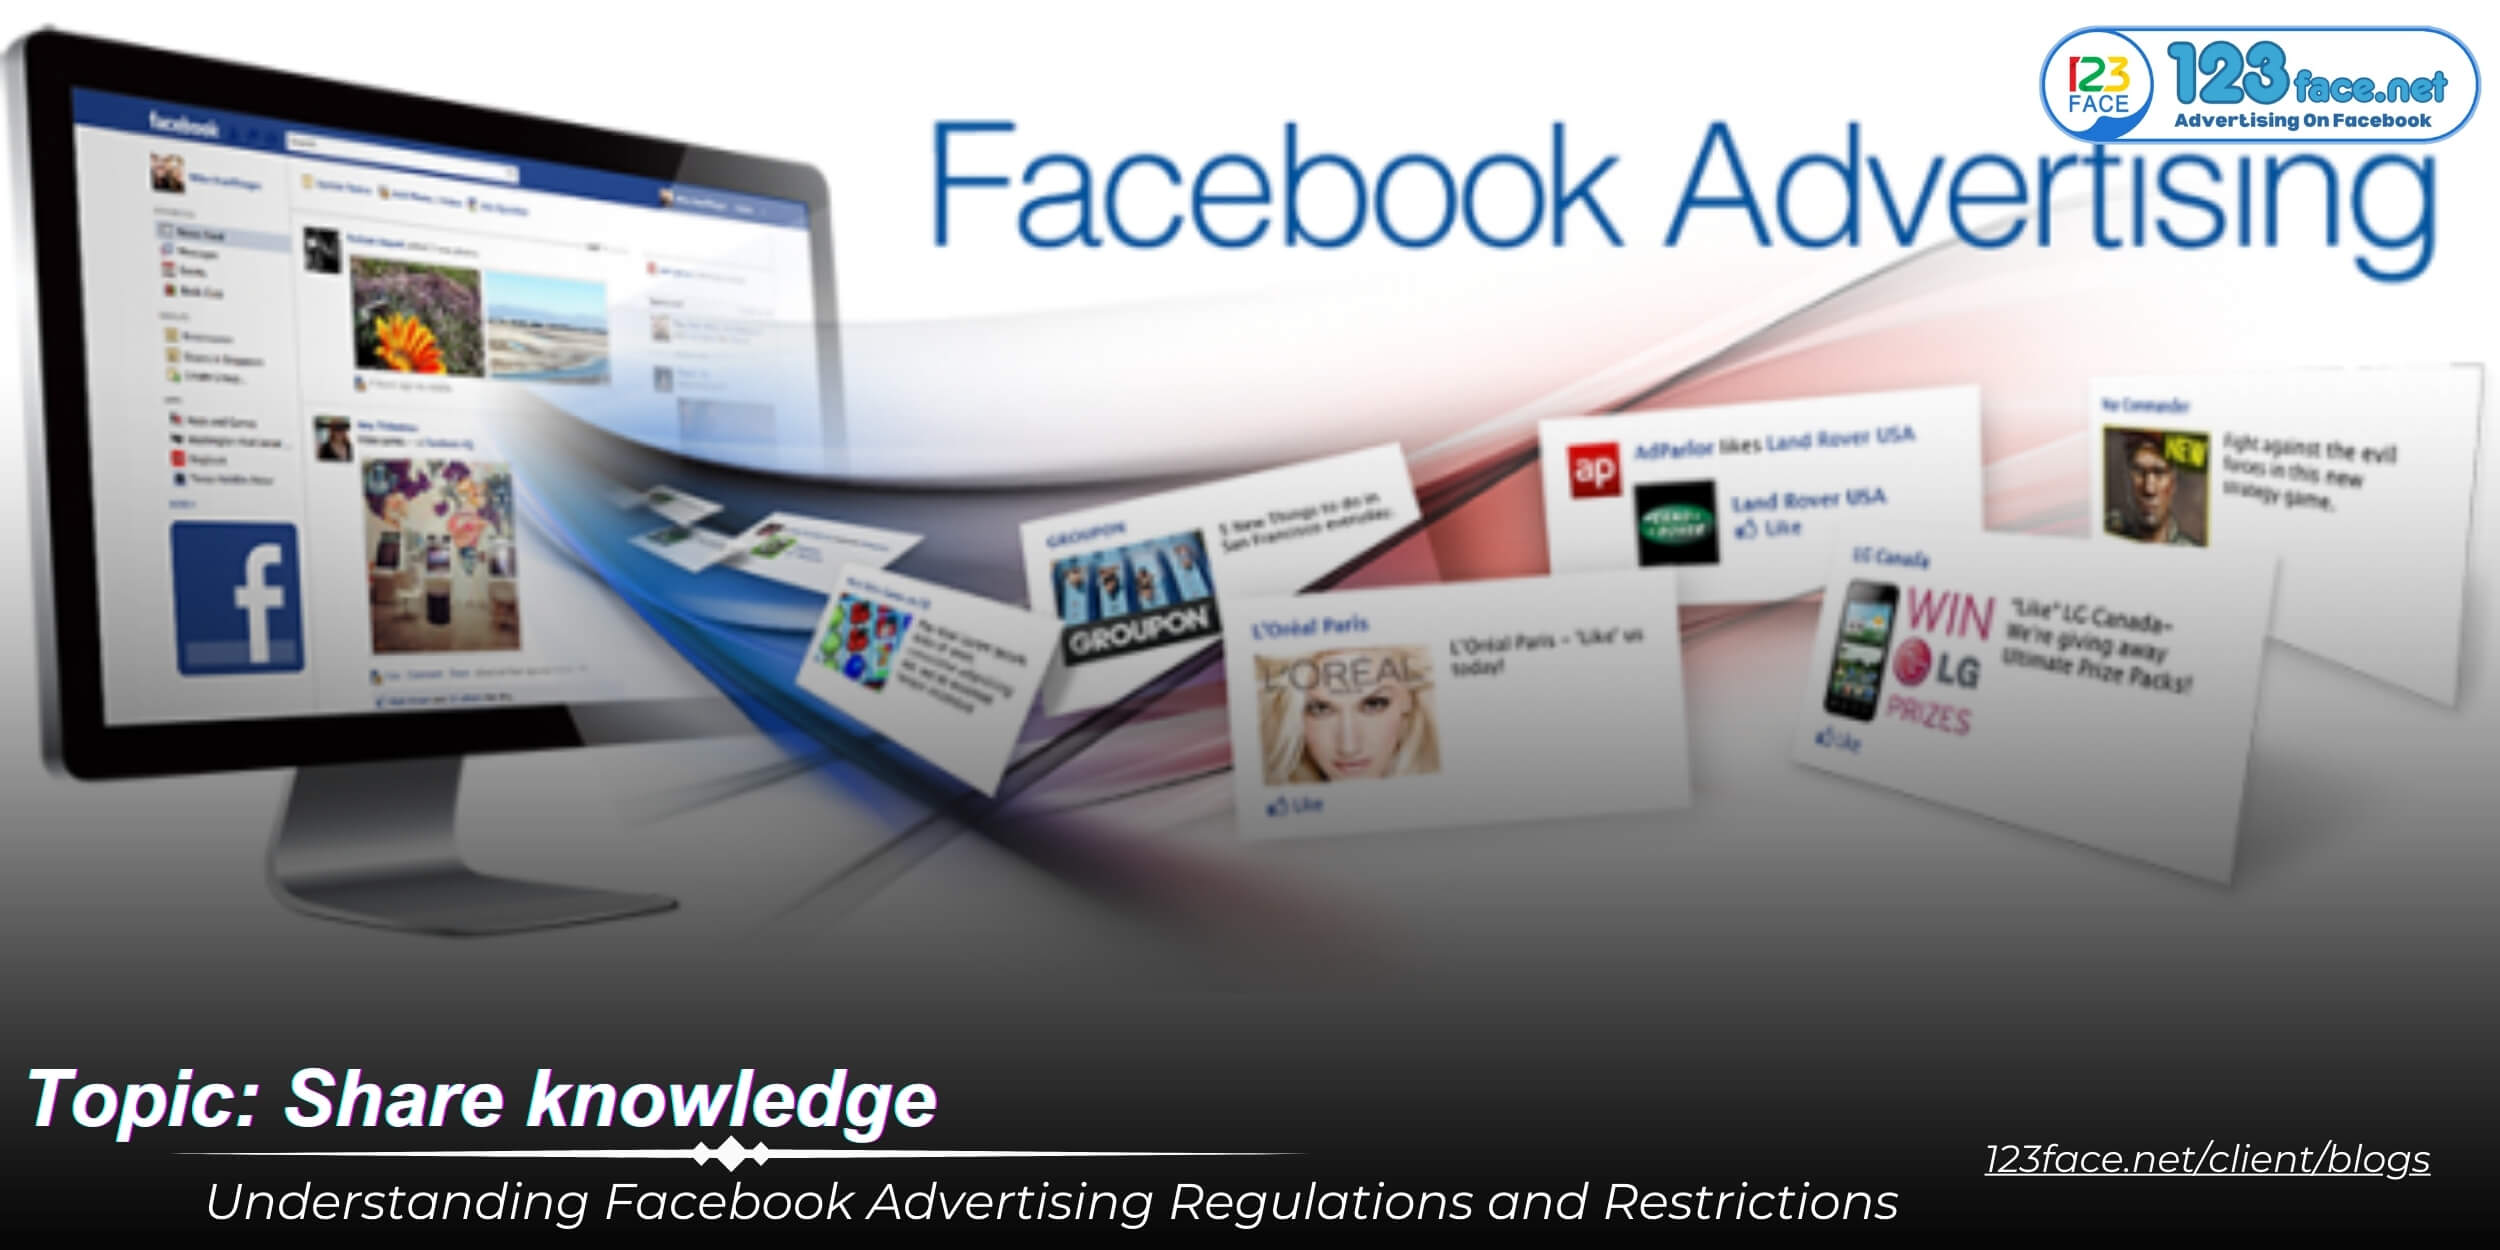 Understanding Facebook Advertising Regulations and Restrictions  (Reference article)